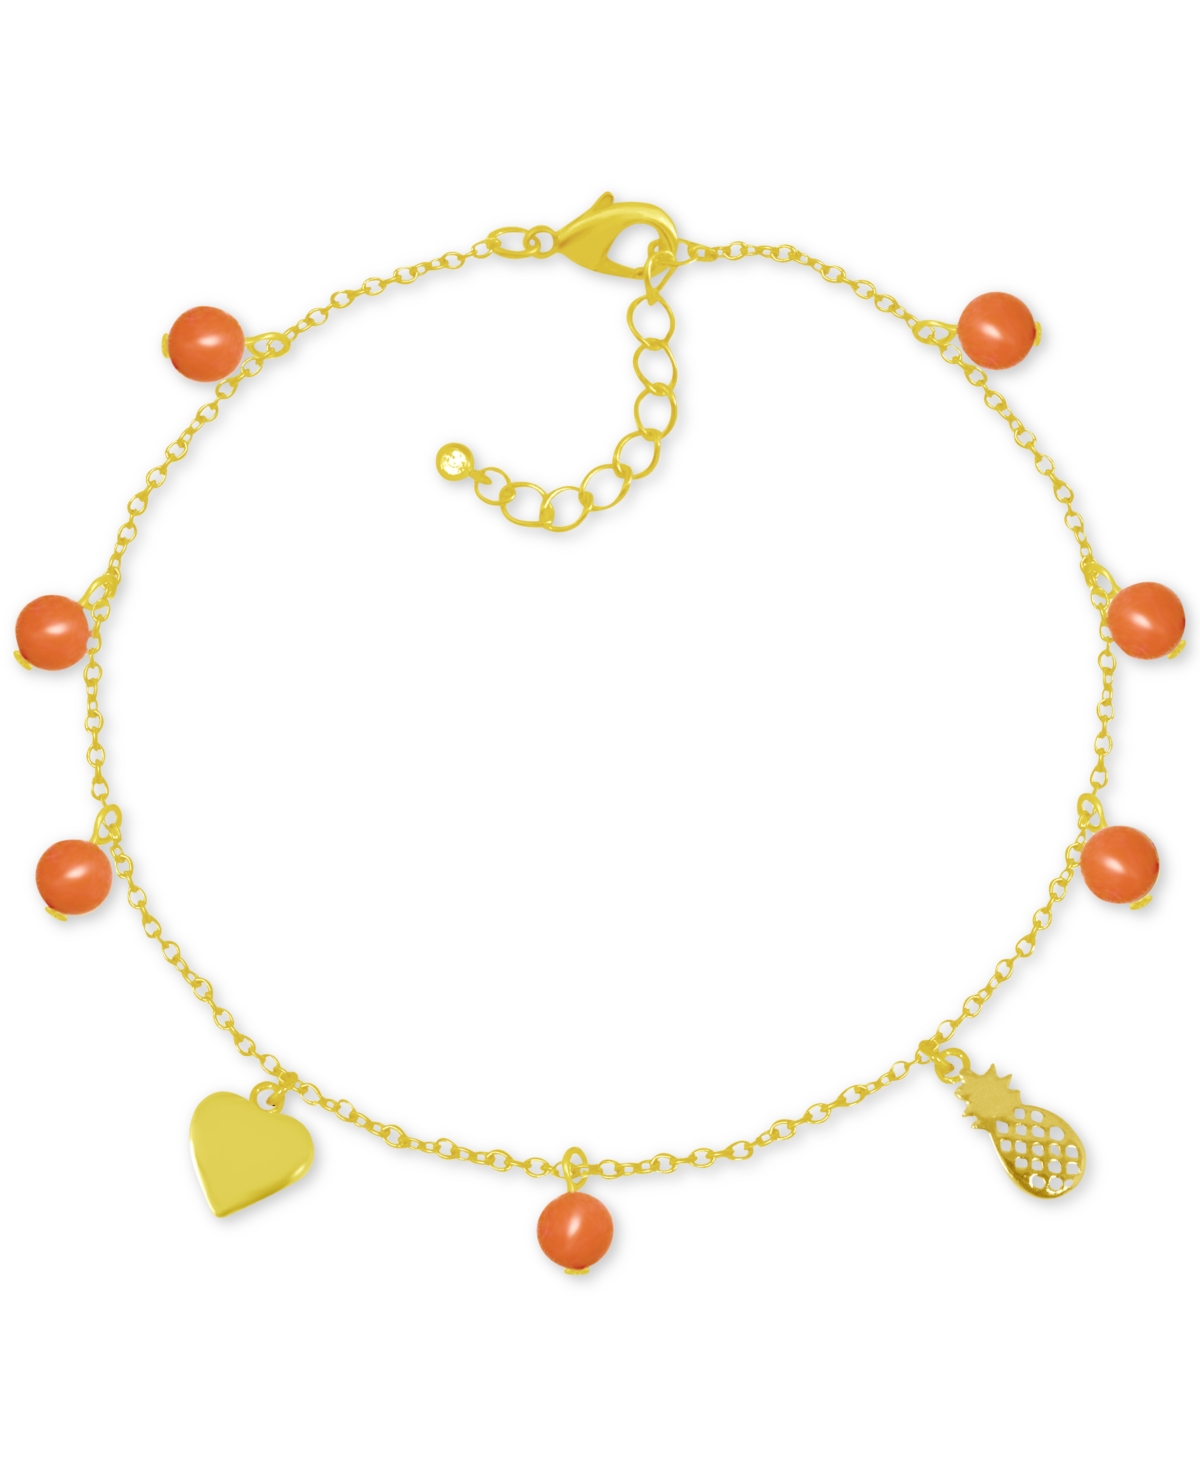 Pineapple & Bead Ankle Bracelet in Gold-Plate - Gold